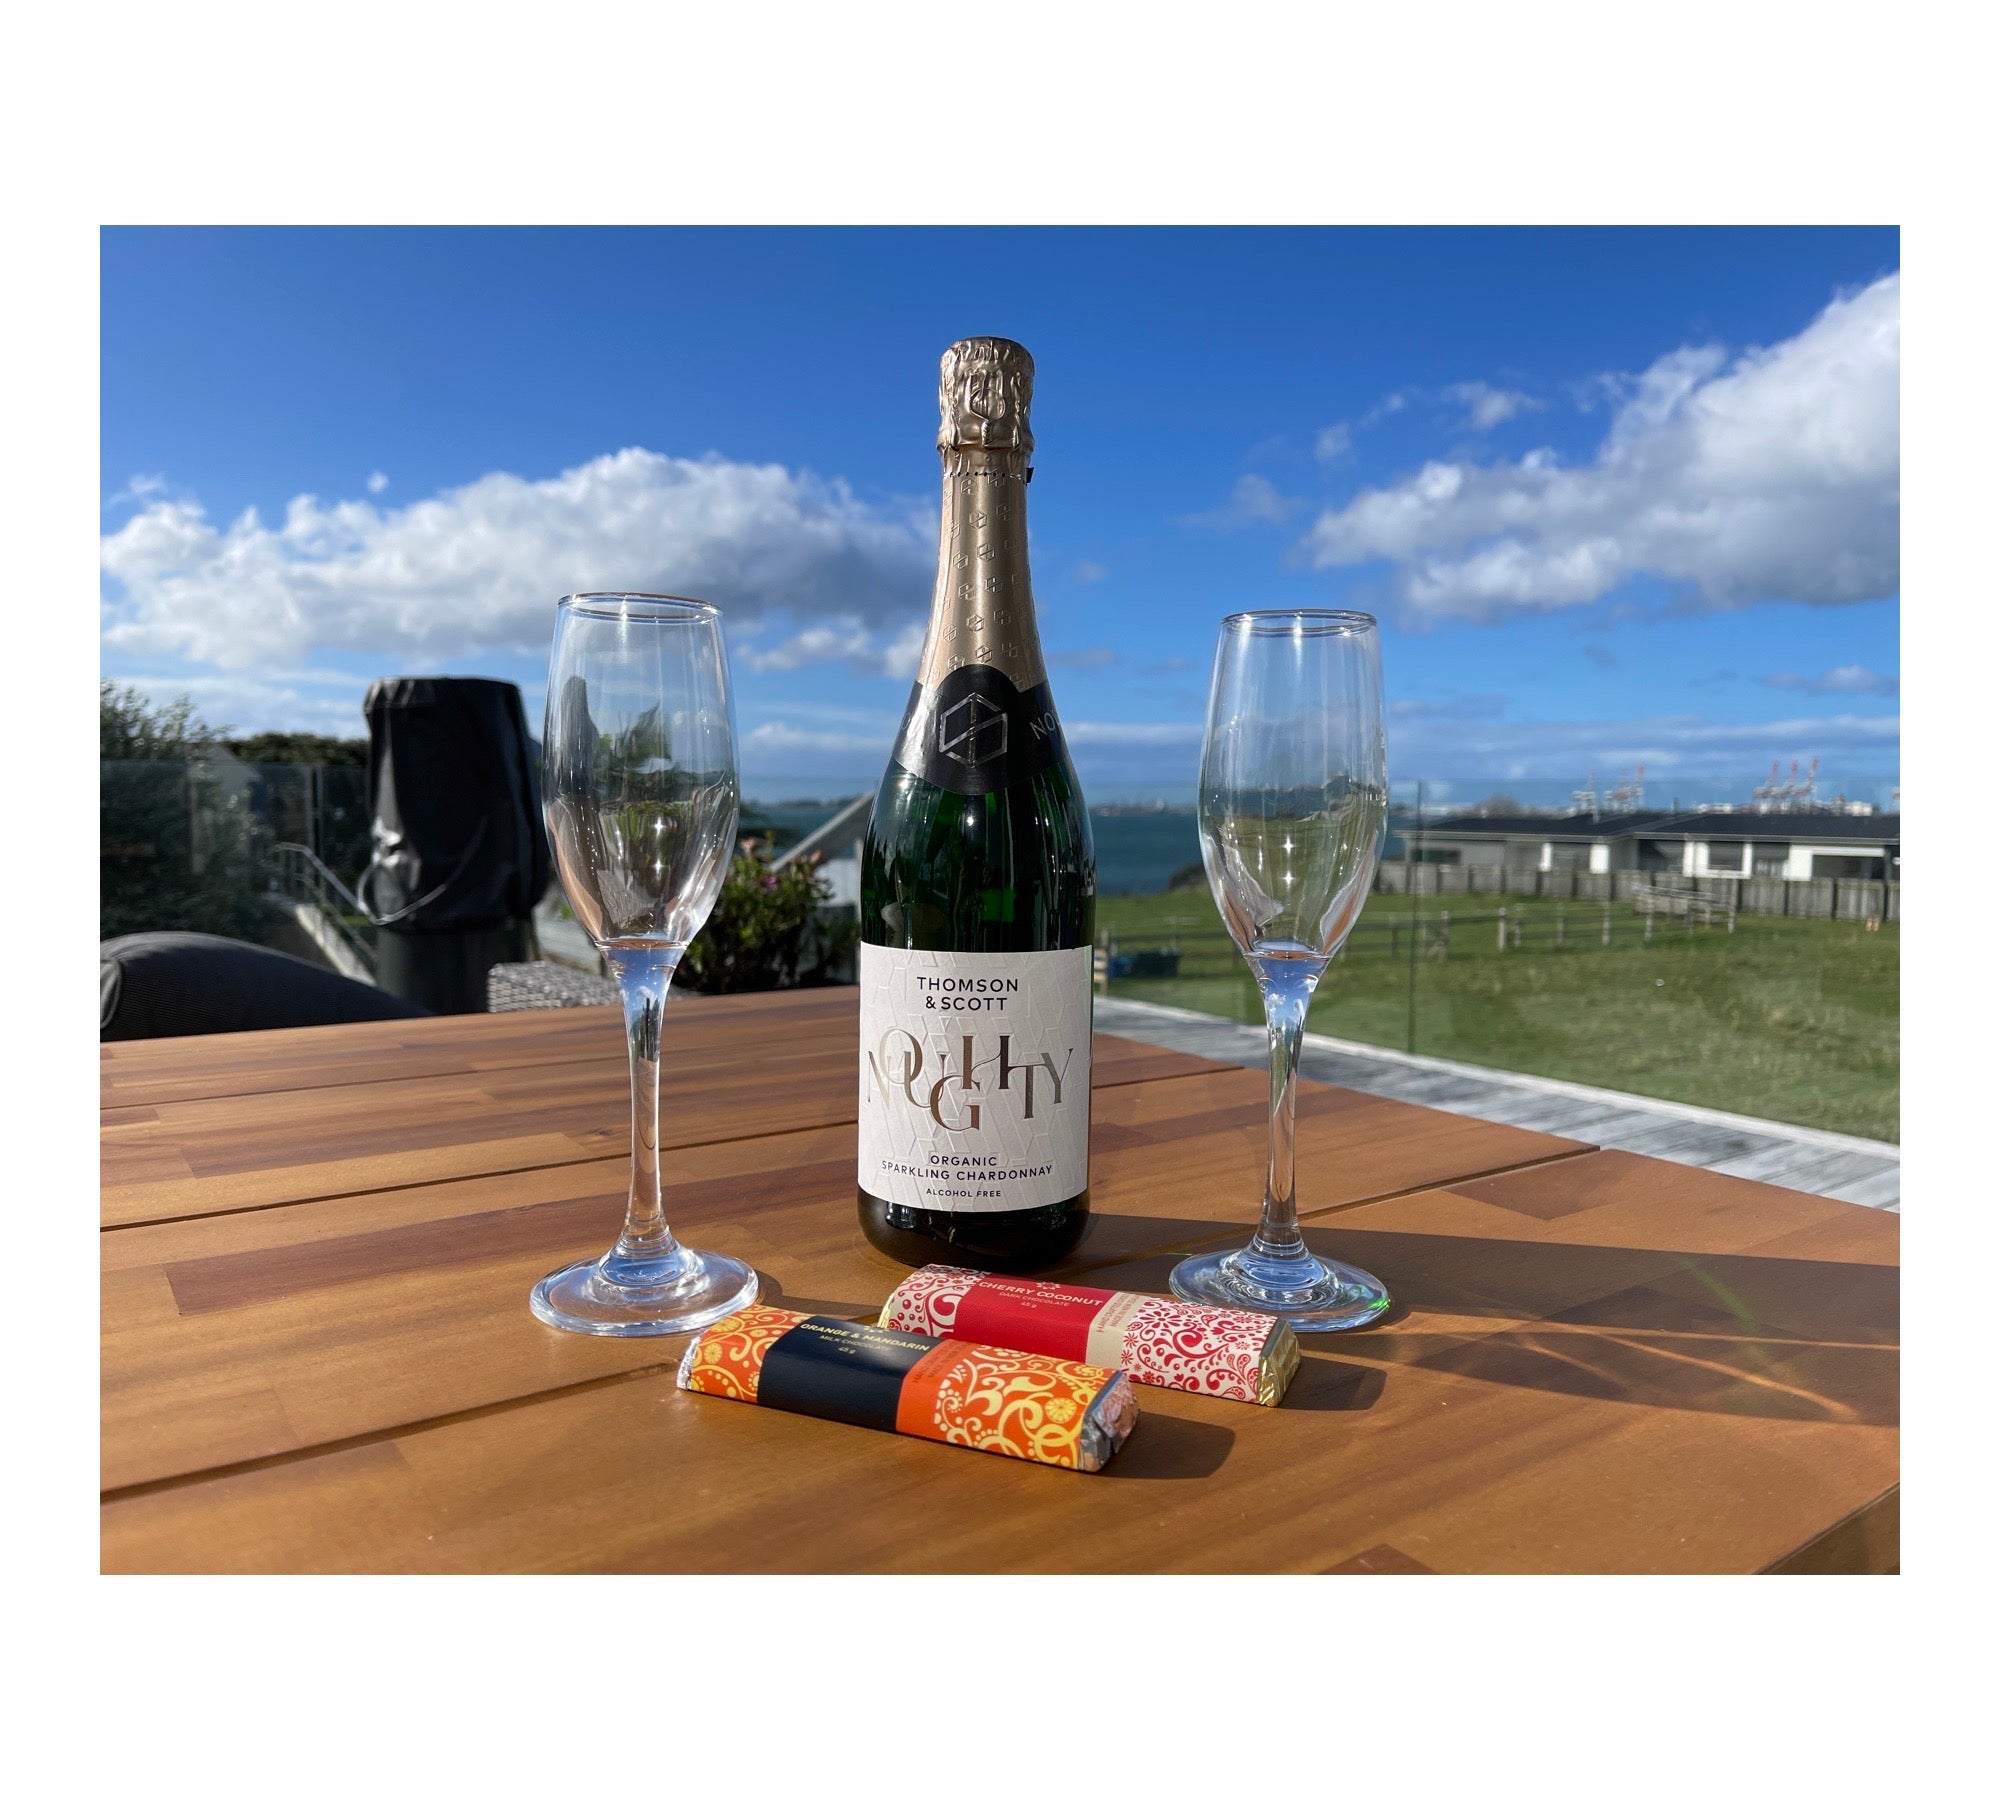 A bottle of Celebrate alcohol-free sparkling wine from giftbox co. with two champagne flutes and party crackers on a wooden table outdoors, with a clear blue sky and green landscape in the background.